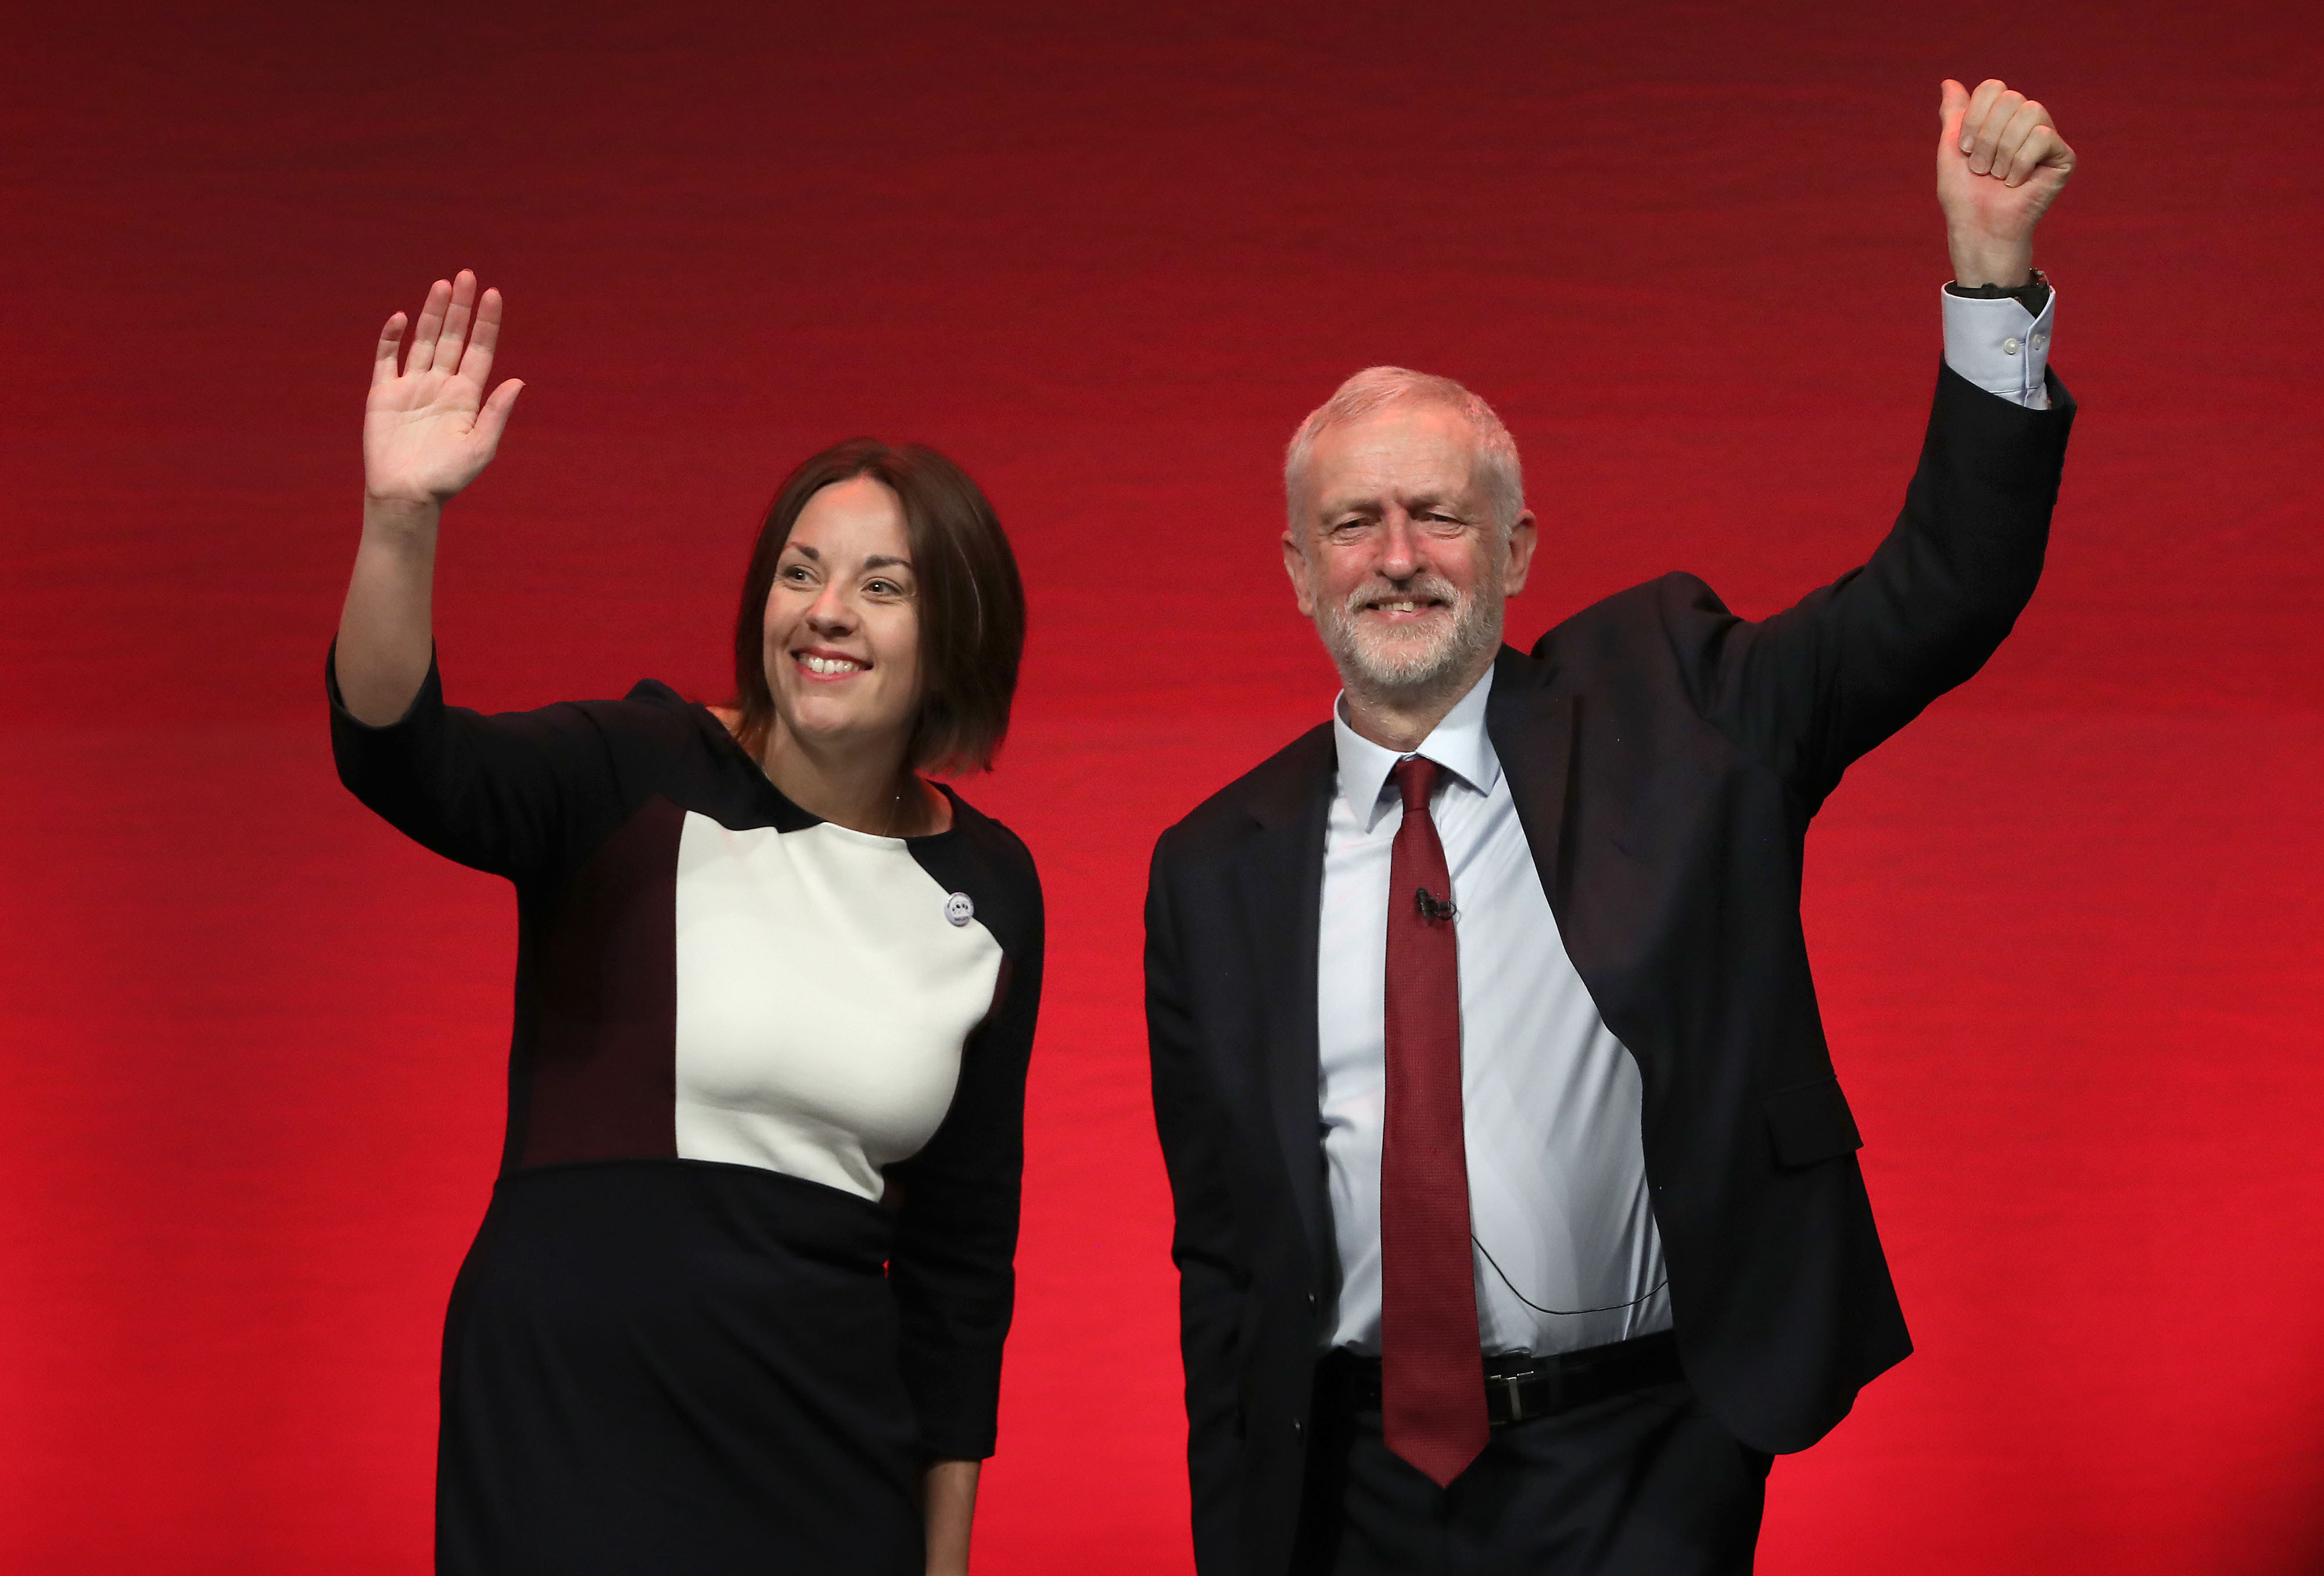 Kezia Dugdale announced she would stand down as Scottish Labour leader in August.